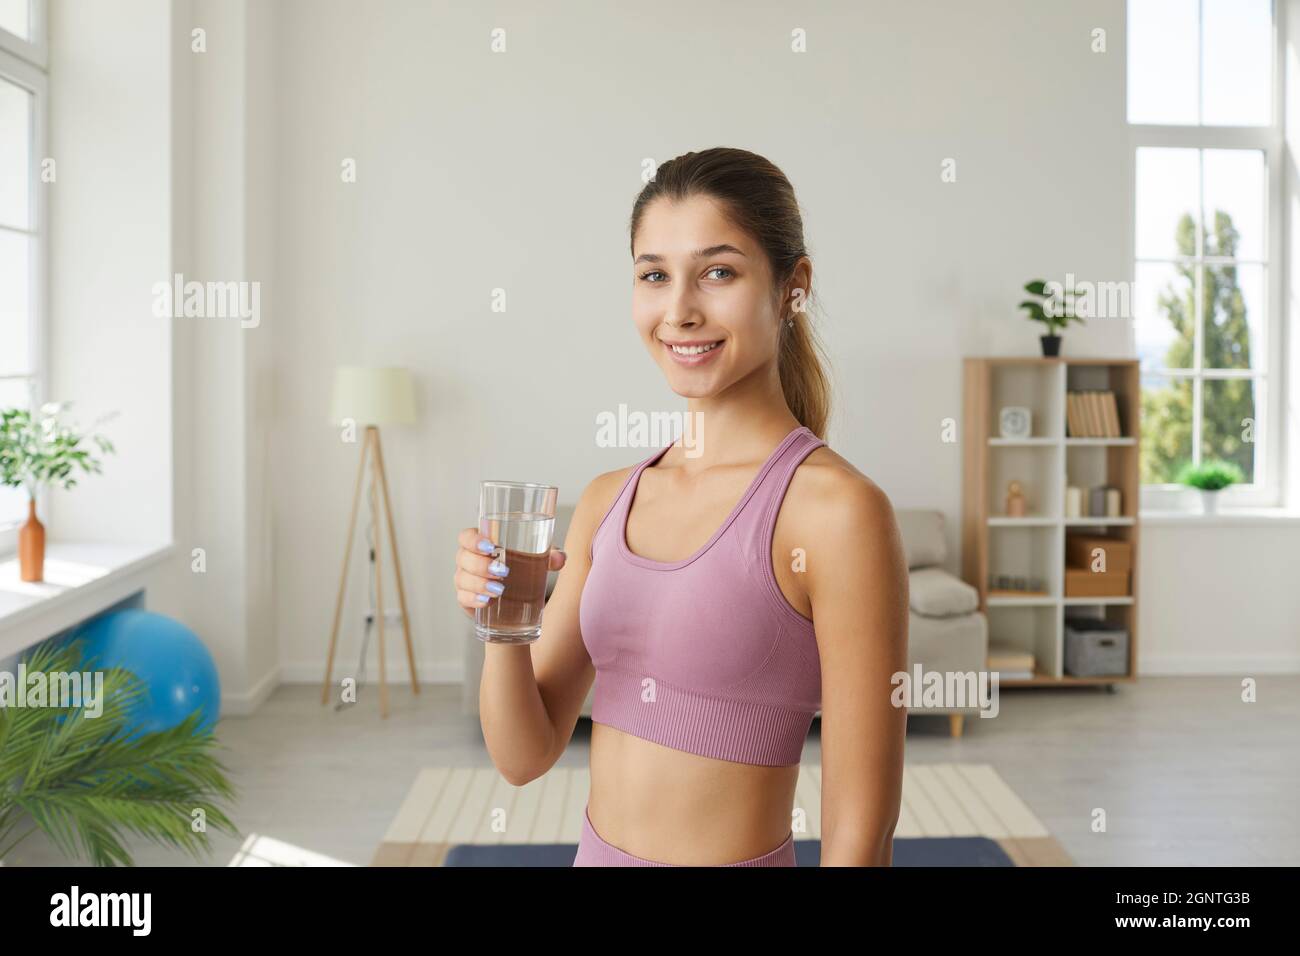 Woman holding glass of water reminding to stay hydrated and lead healthy lifestyle Stock Photo